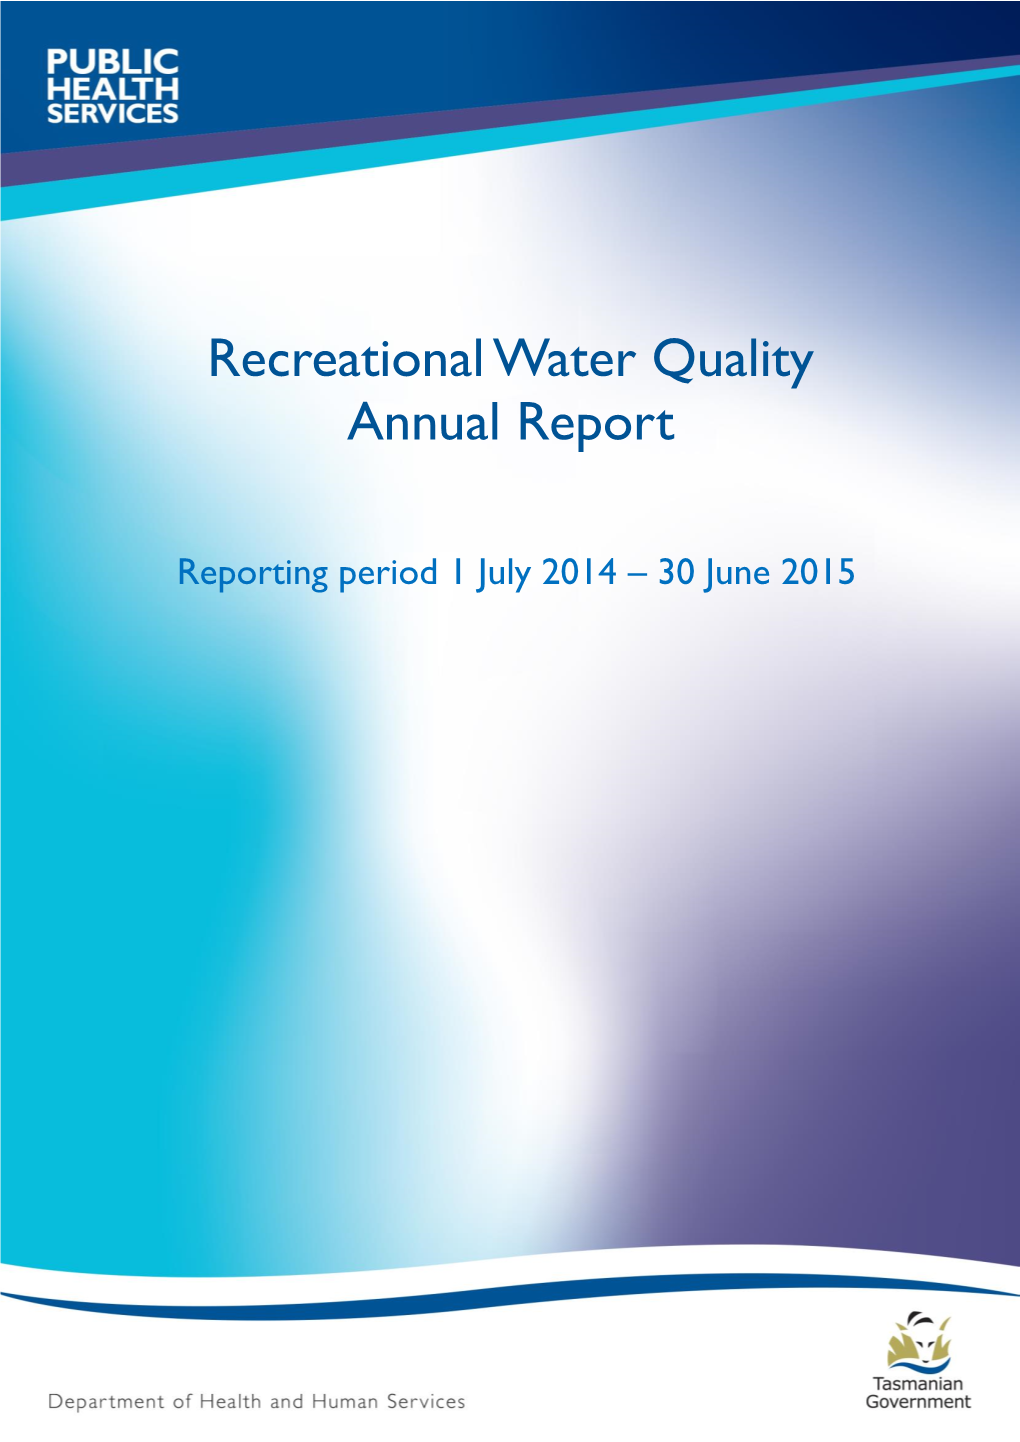 Recreational Water Quality Annual Report